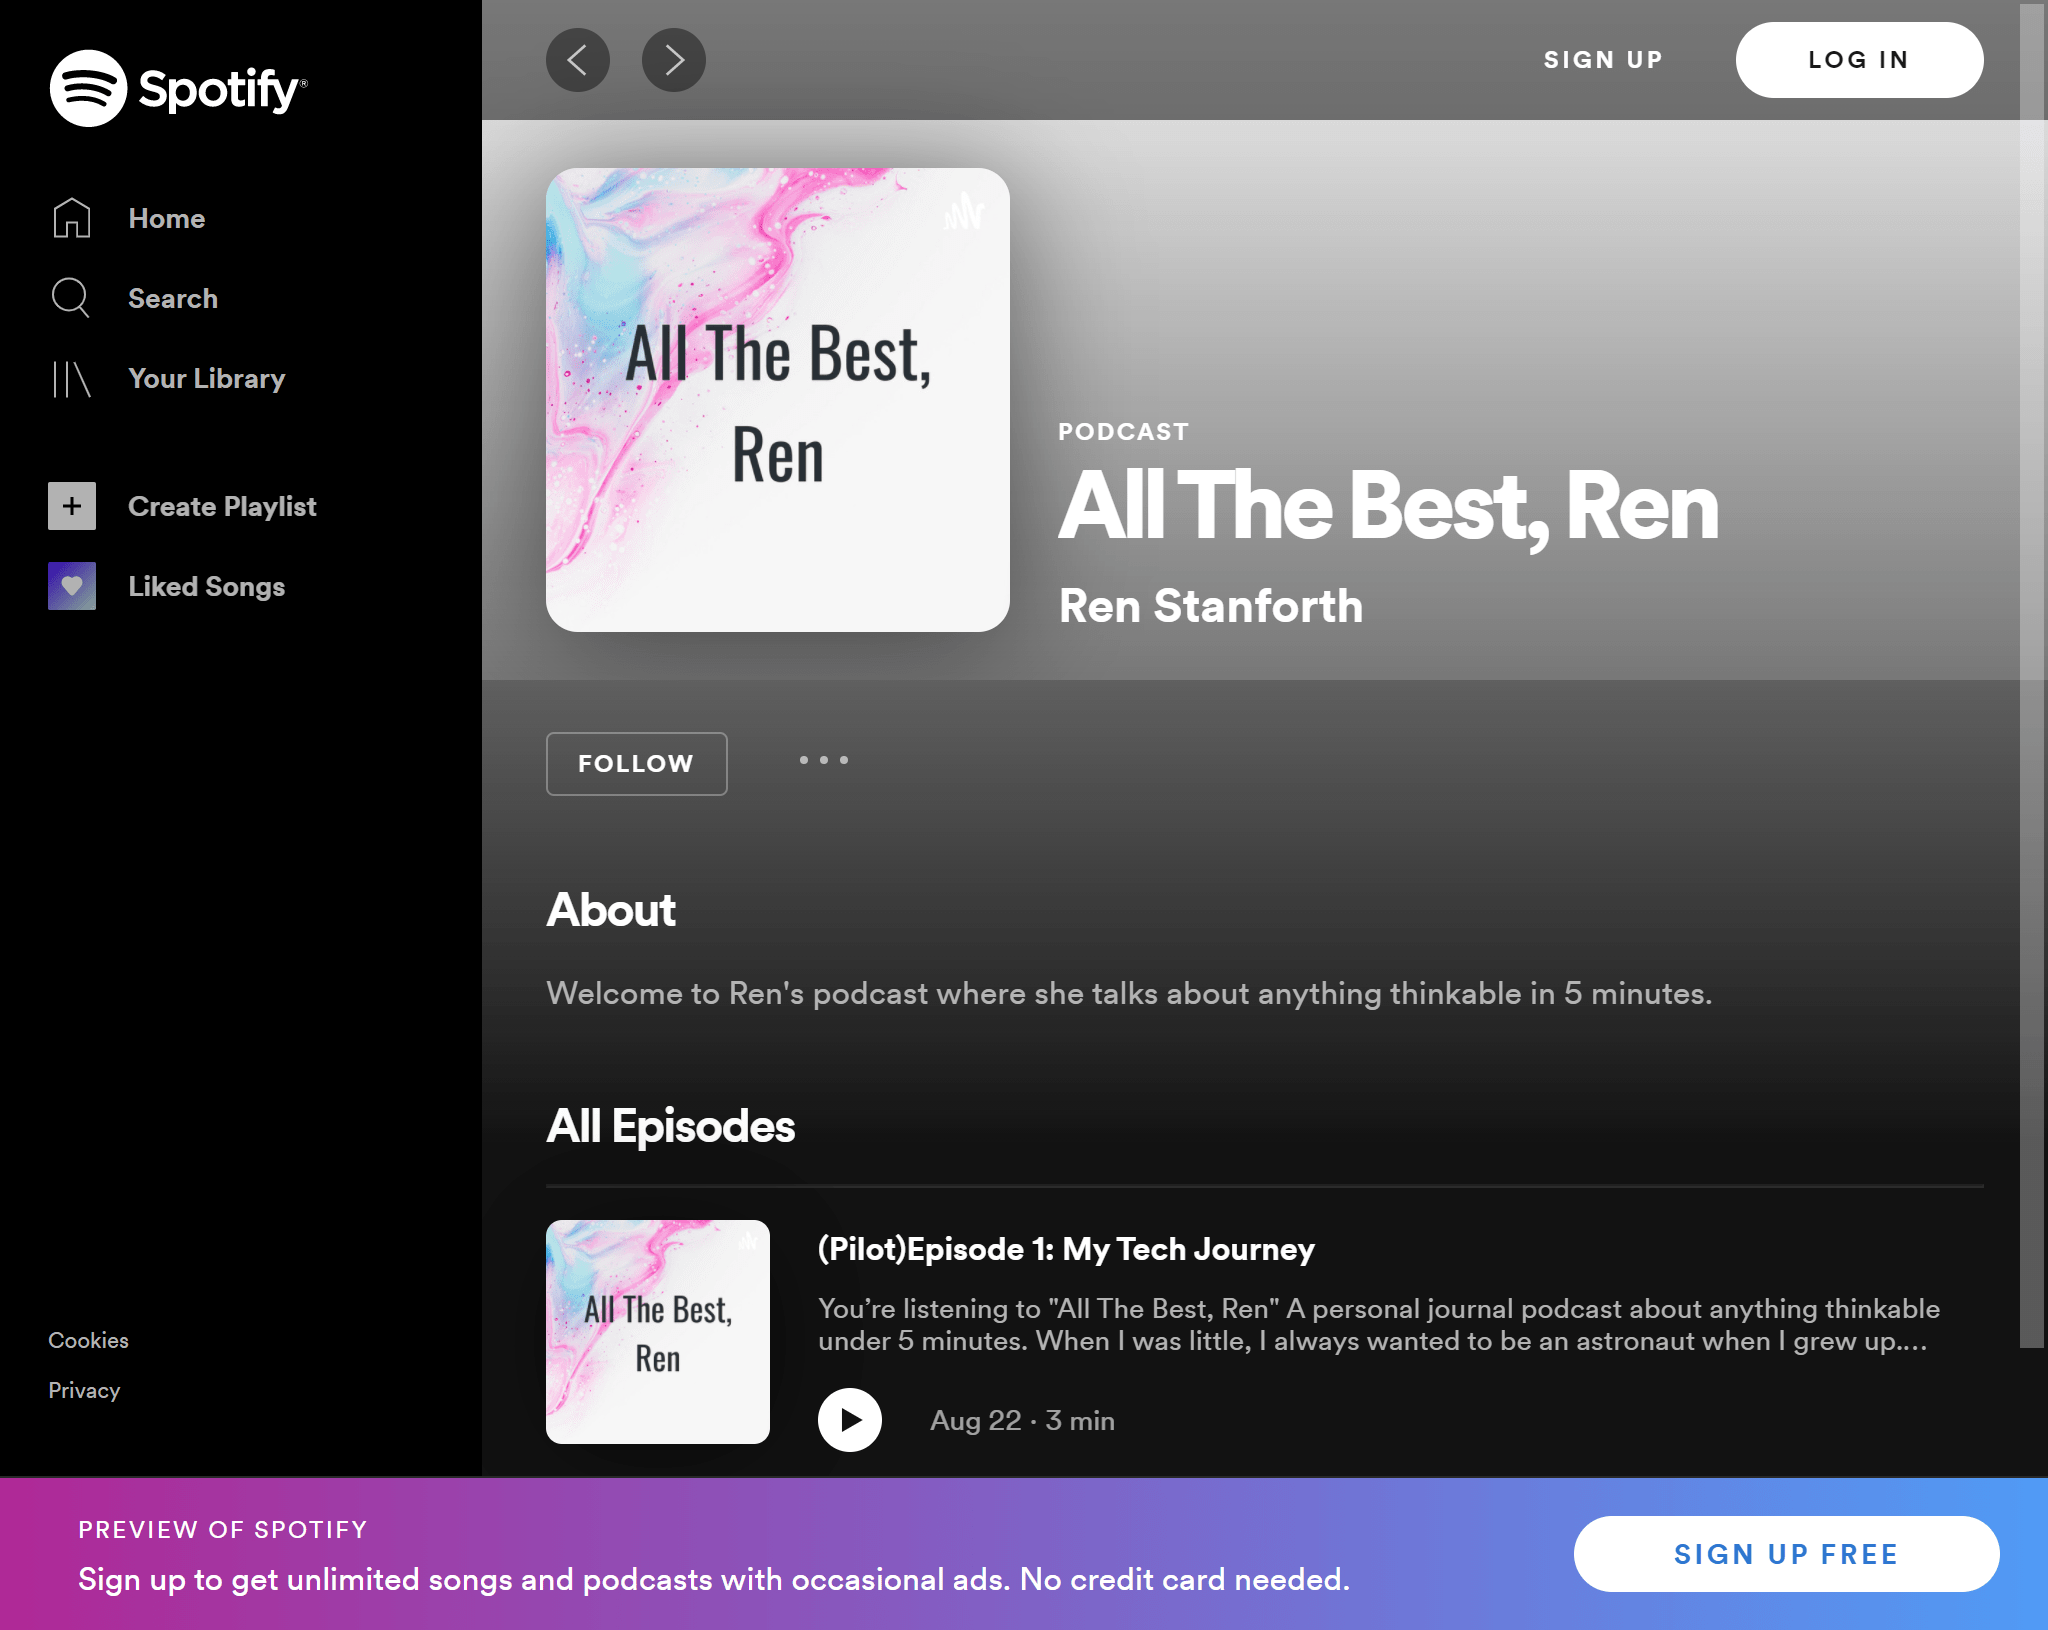 All The Best, Ren Podcast